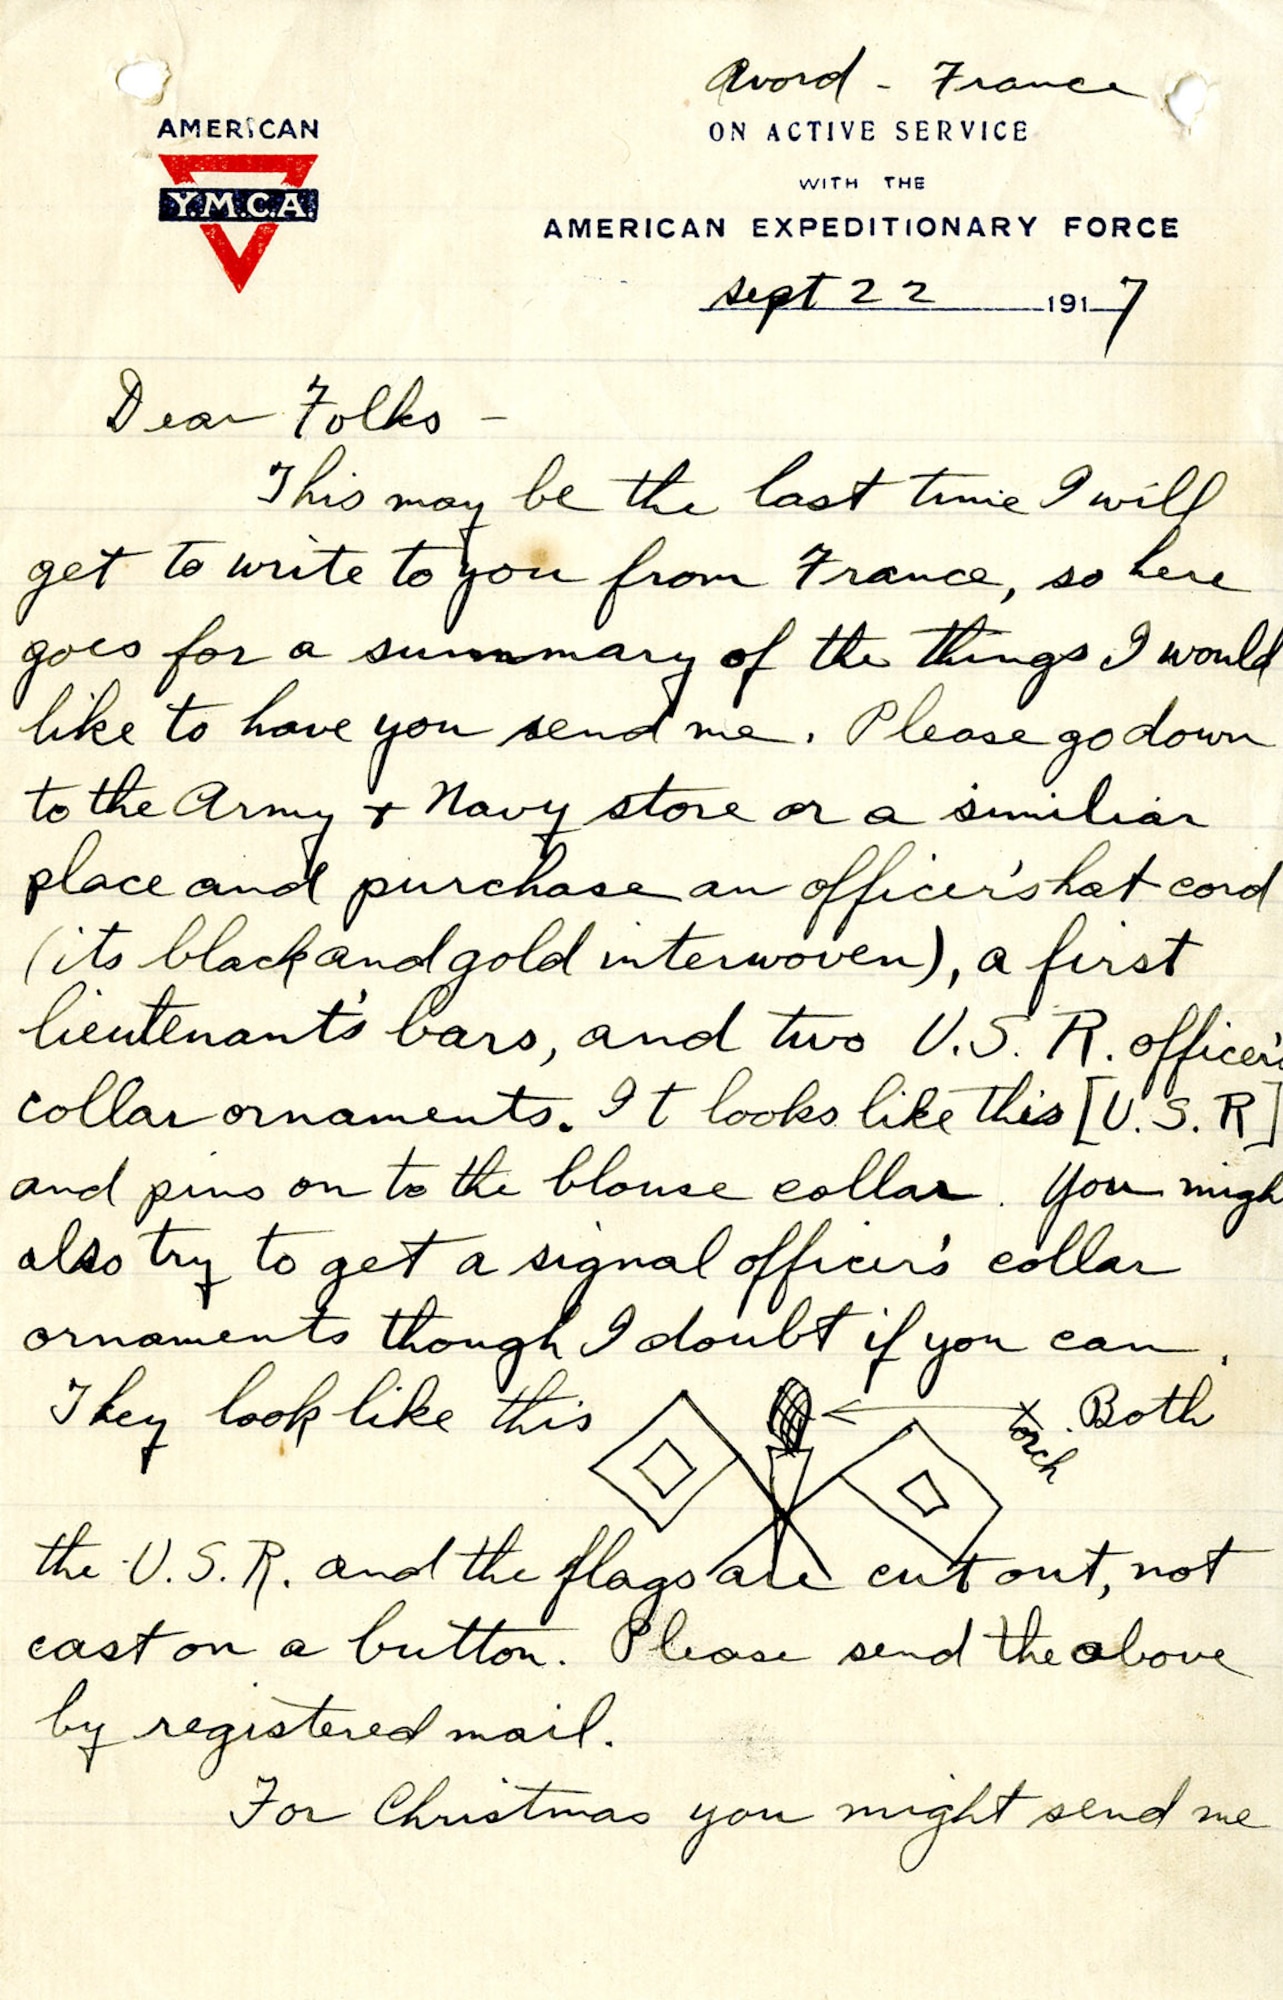 In September 1917, Lt. Harold R. Harris, who had recently completed Ground School at the University of California Berkeley, was en-route to Italy, to assist in establishing the 8th Aviation Instruction Center for the Allied Expeditionary Force in Foggia. This is page 1 of the letter Harris wrote to his family before leaving France. He asked them to send him several things, including new officer's insignia and magazines. (U.S. Air Force photo)